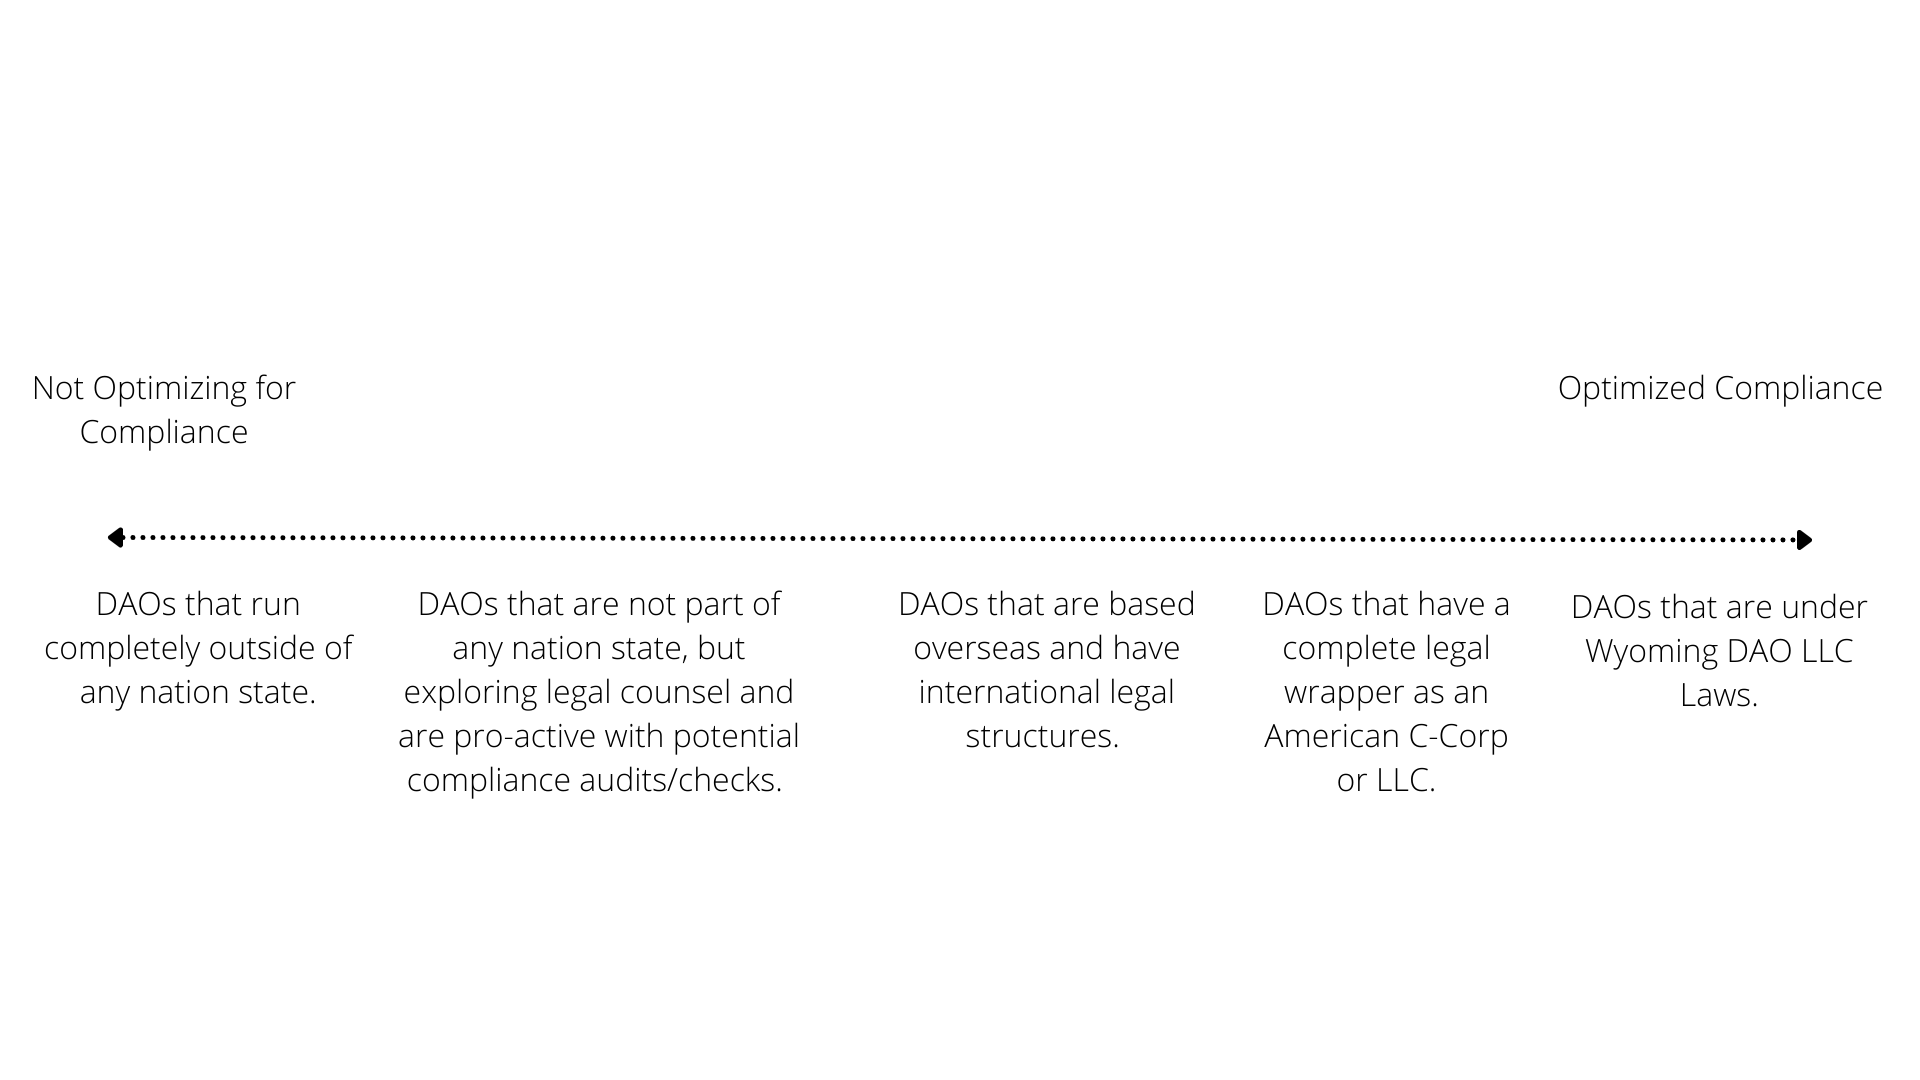 Note how DAOs aren't necessarily a binary between "non-compliant" vs "compliant":